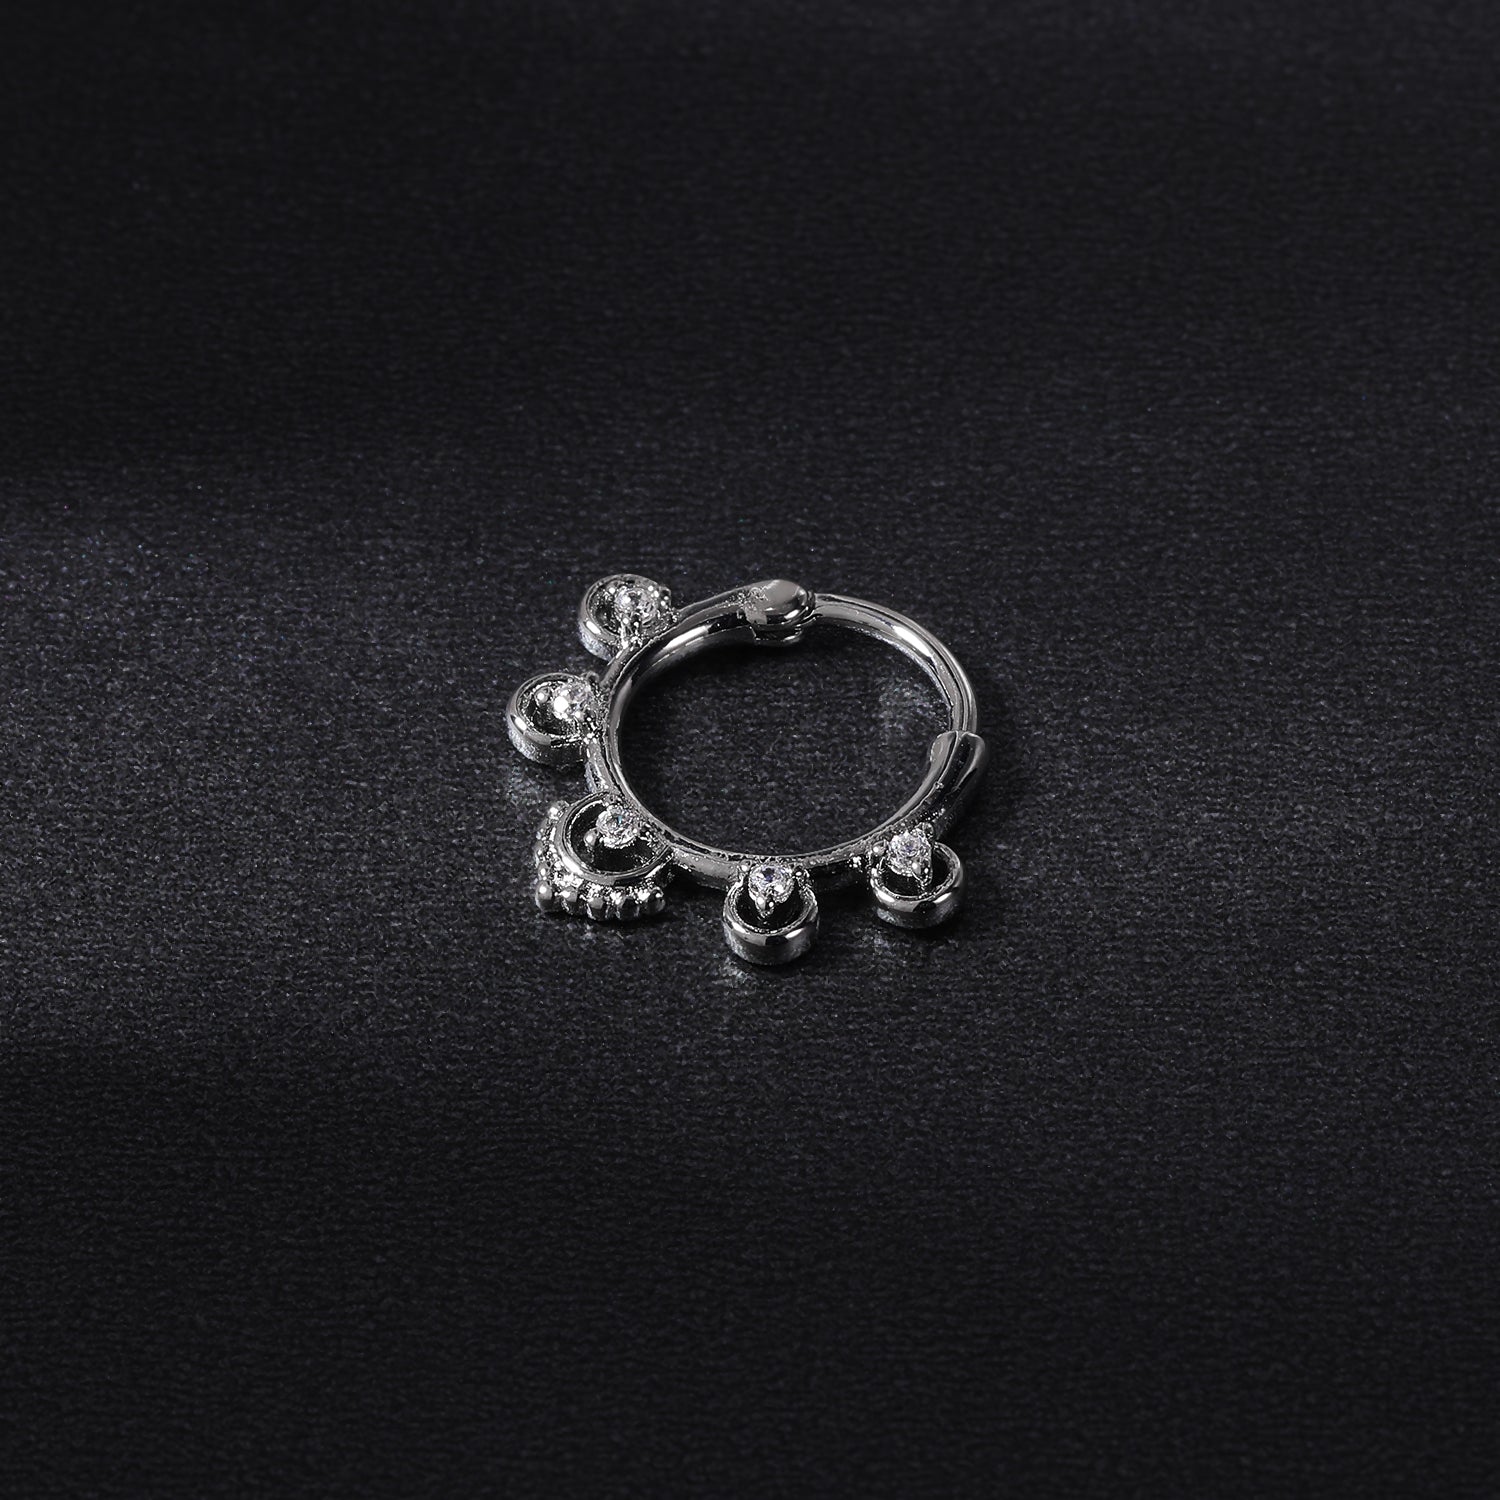 16g-round-crystal-septum-clicker-nose-ring-ball-cartilage-helix-piercing